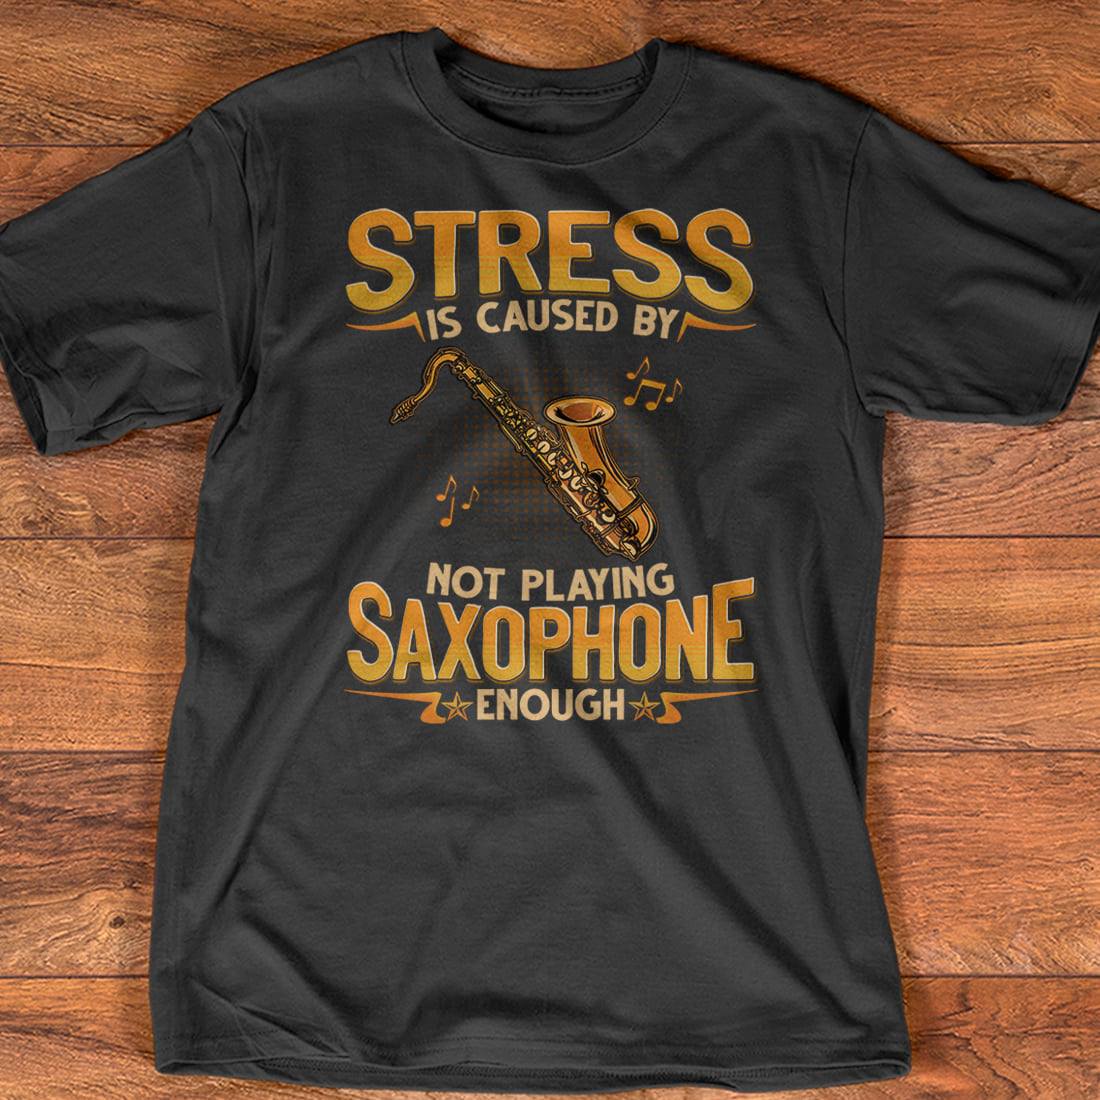 Stress is caused by not playing saxophone enough - Saxophone the instrument